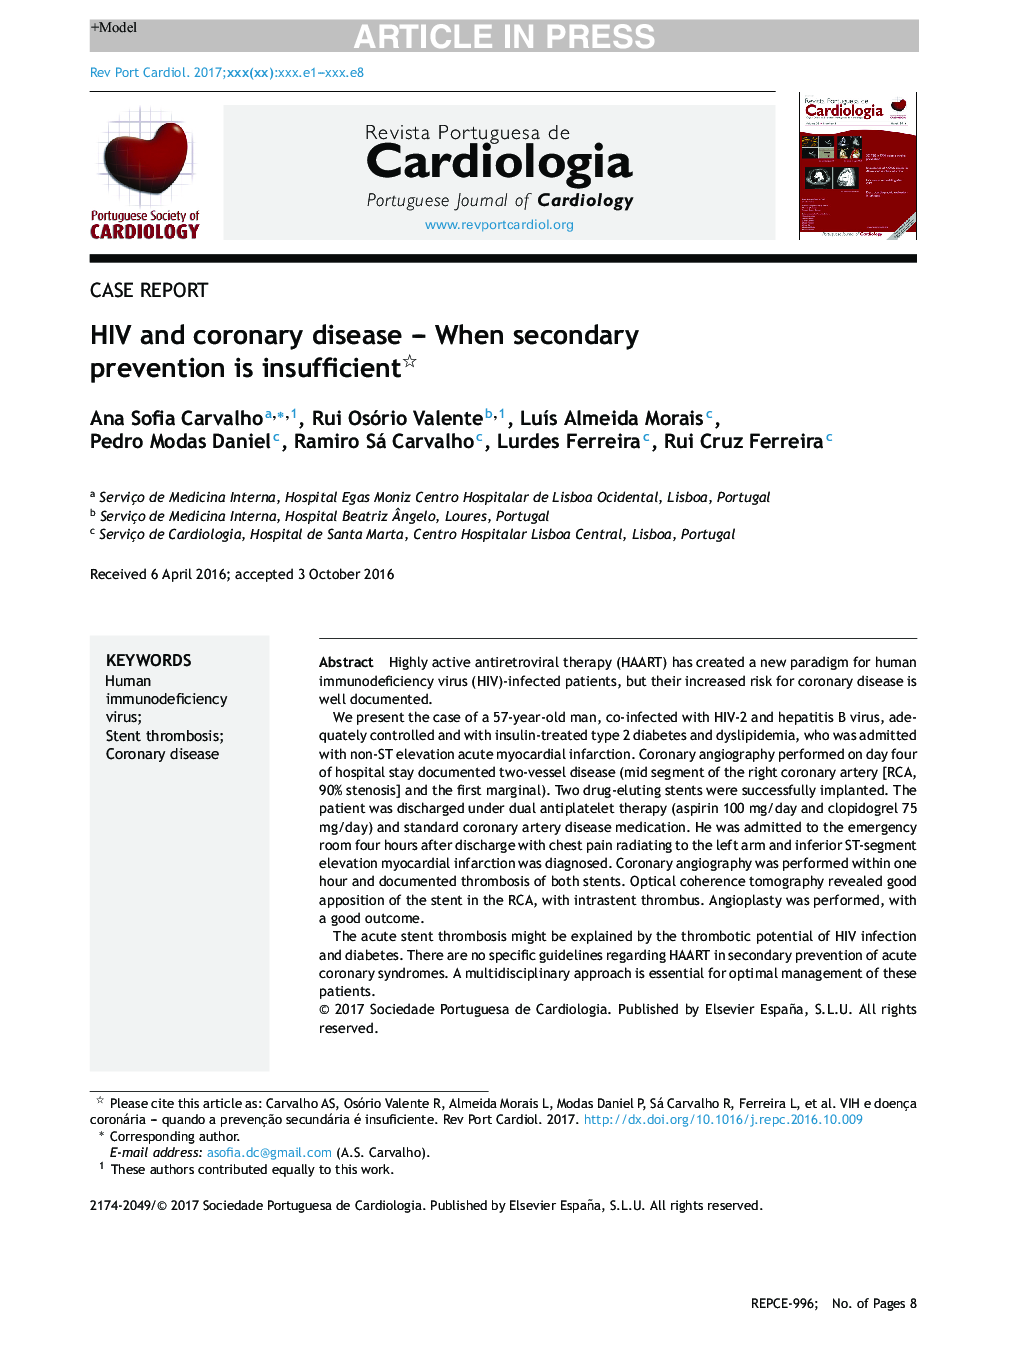 HIV and coronary disease - When secondary prevention is insufficient